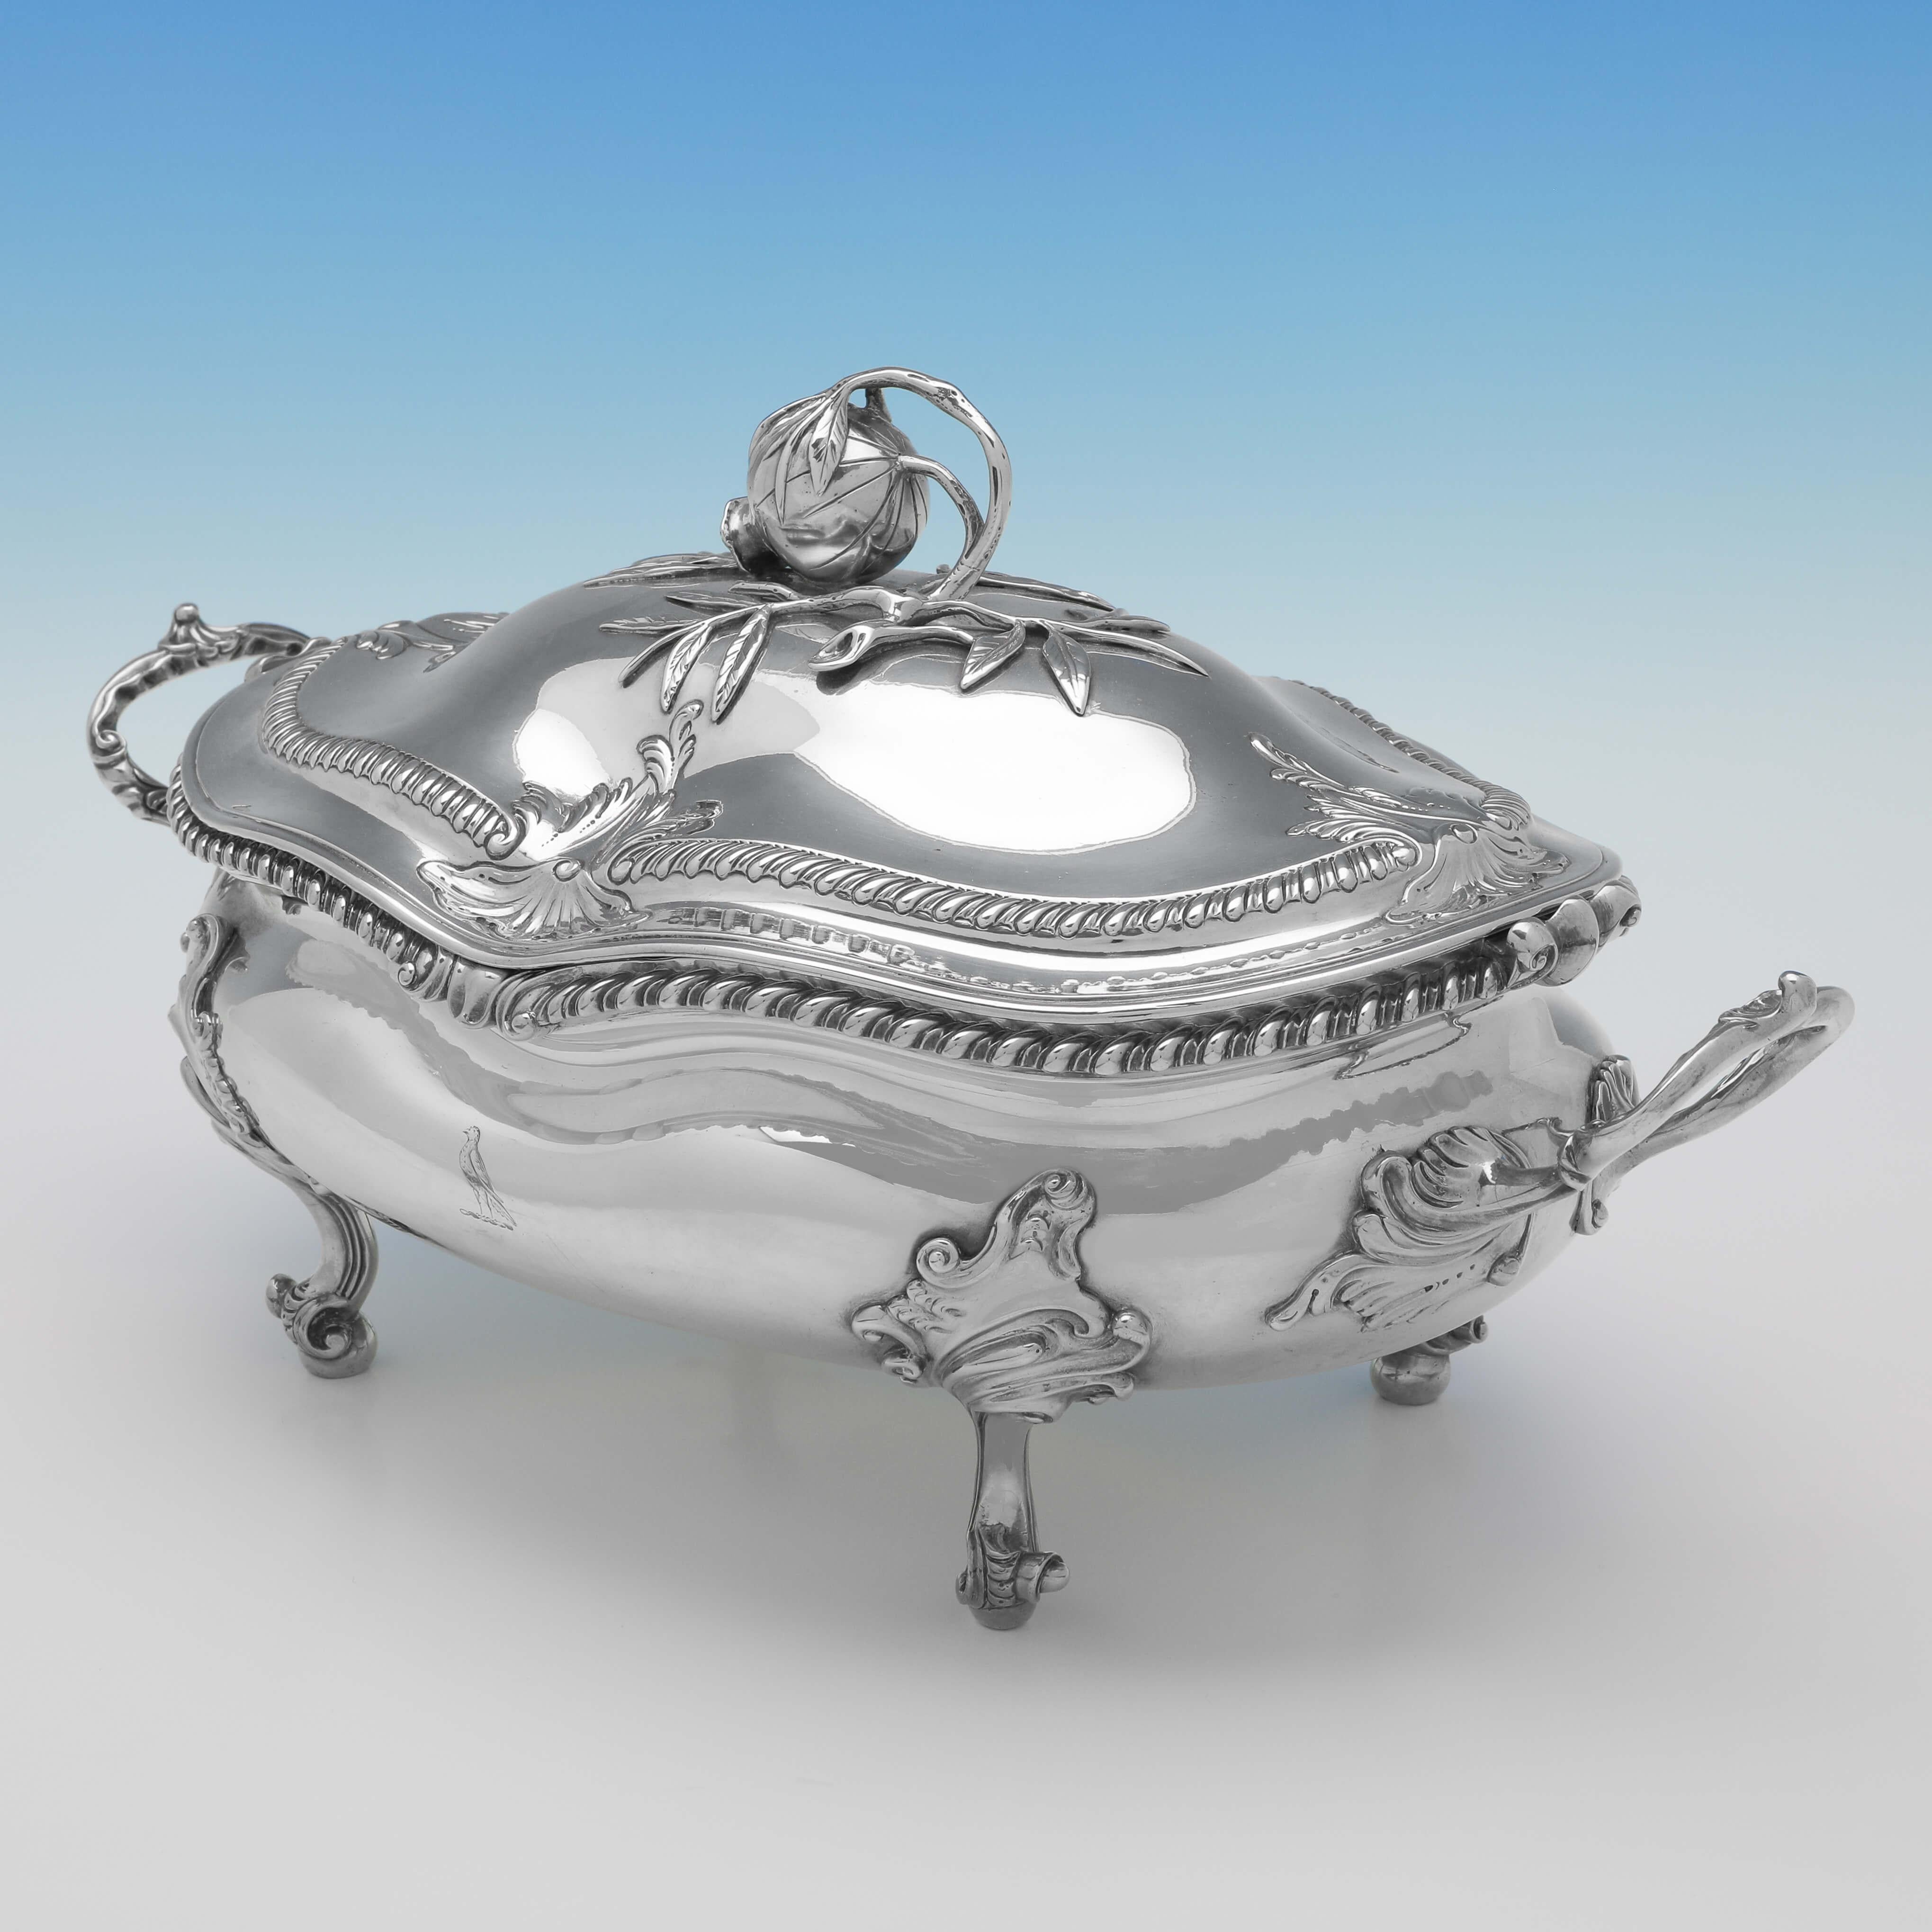 Hallmarked in London in 1772 by Sebastian & James Crespell, this wonderful, George III, Antique Sterling Silver Soup Tureen, stands on four scroll feet, and features gadroon borders, acanthus decoration, an engraved crest, and a pumpkin finial. The